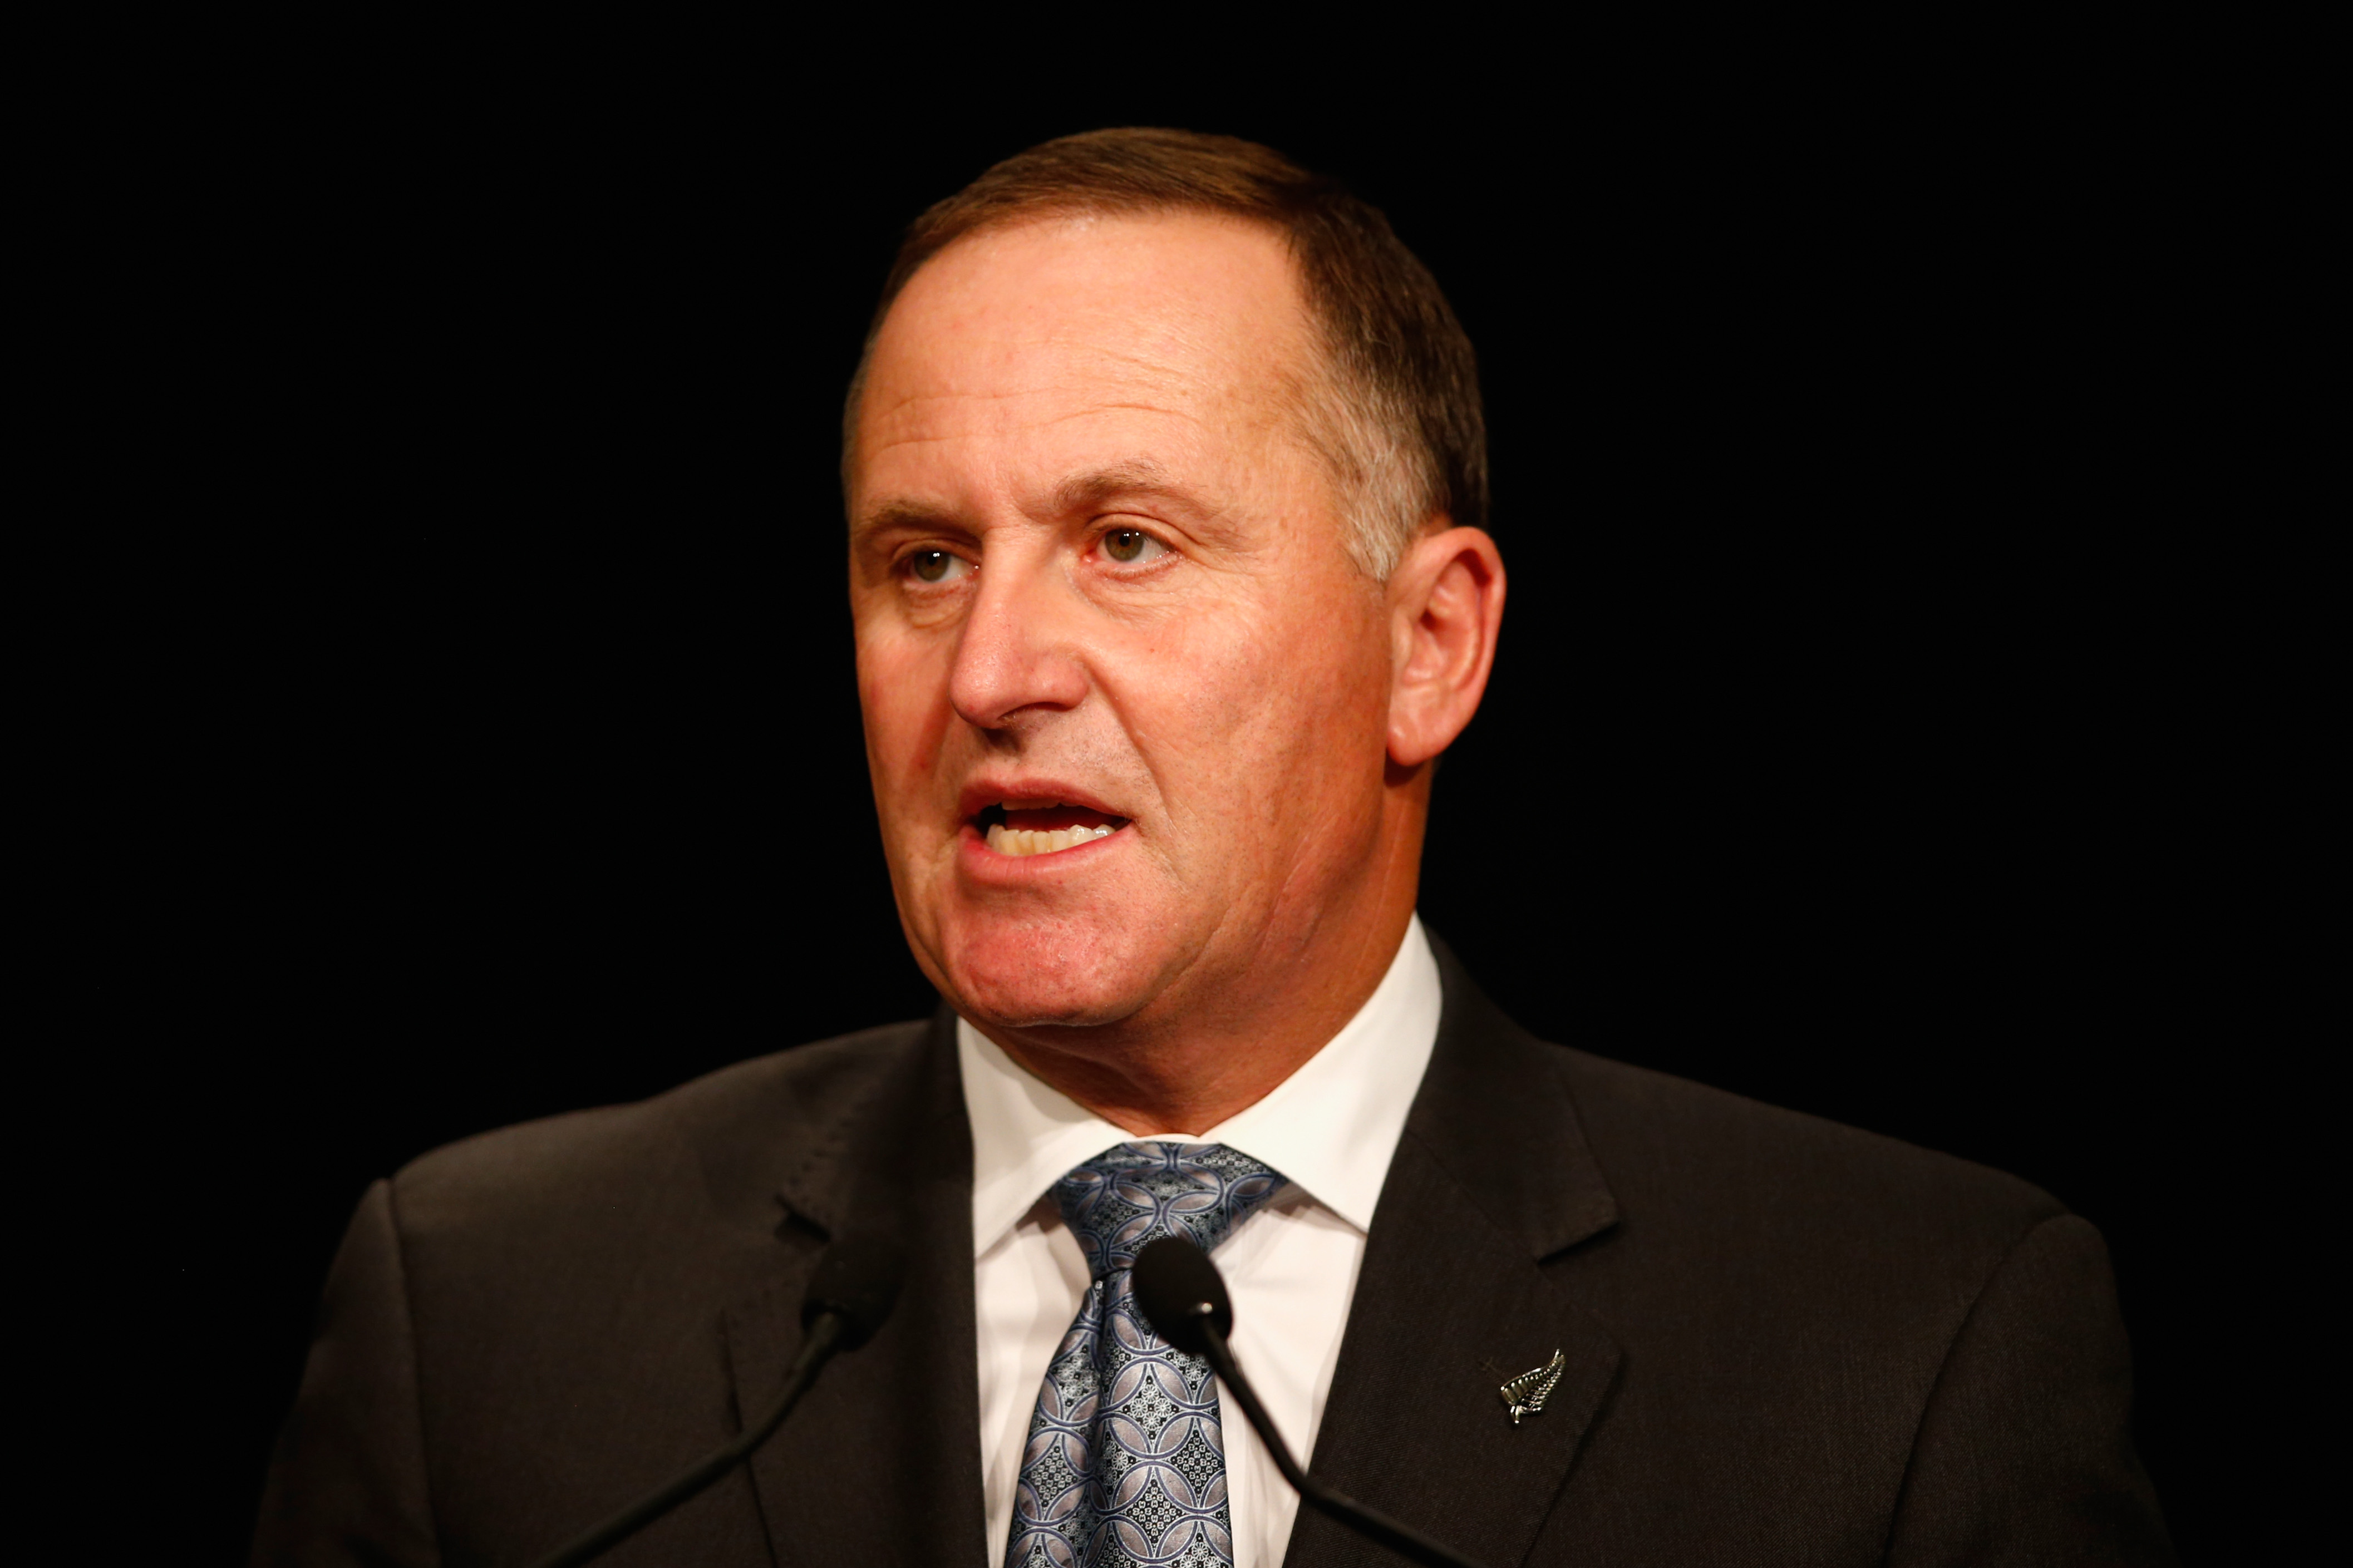 New Zealand Prime Minister John Key delivers his 2015 State of the Nation speech to the Auckland Rotary Club at the Stamford Plaza on January 28, 2015 (Phil Walte—Getty Images)